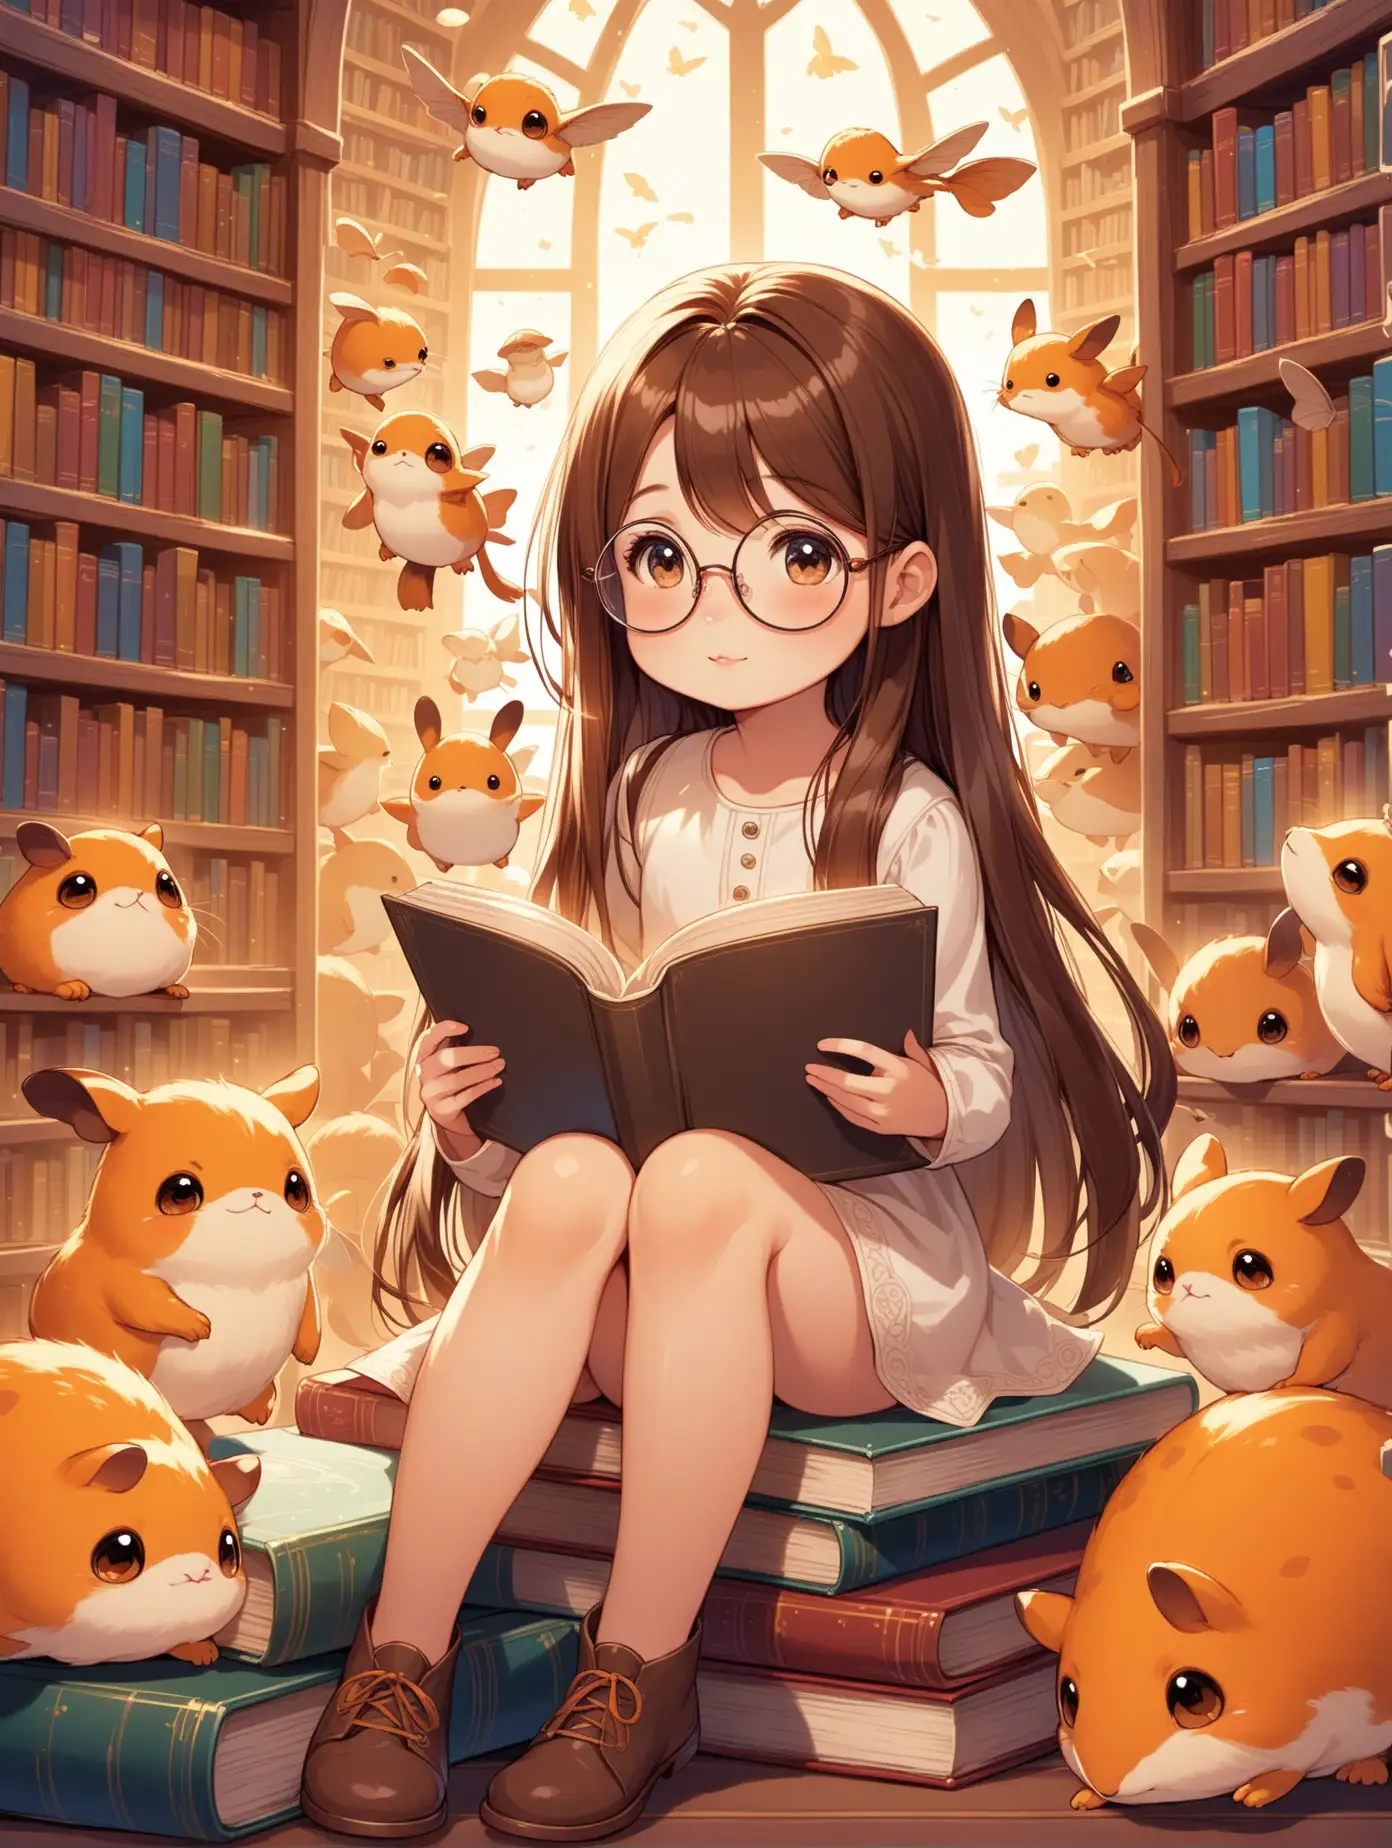 Adorable Girl with Round Glasses Surrounded by Fantasy Creatures in Library